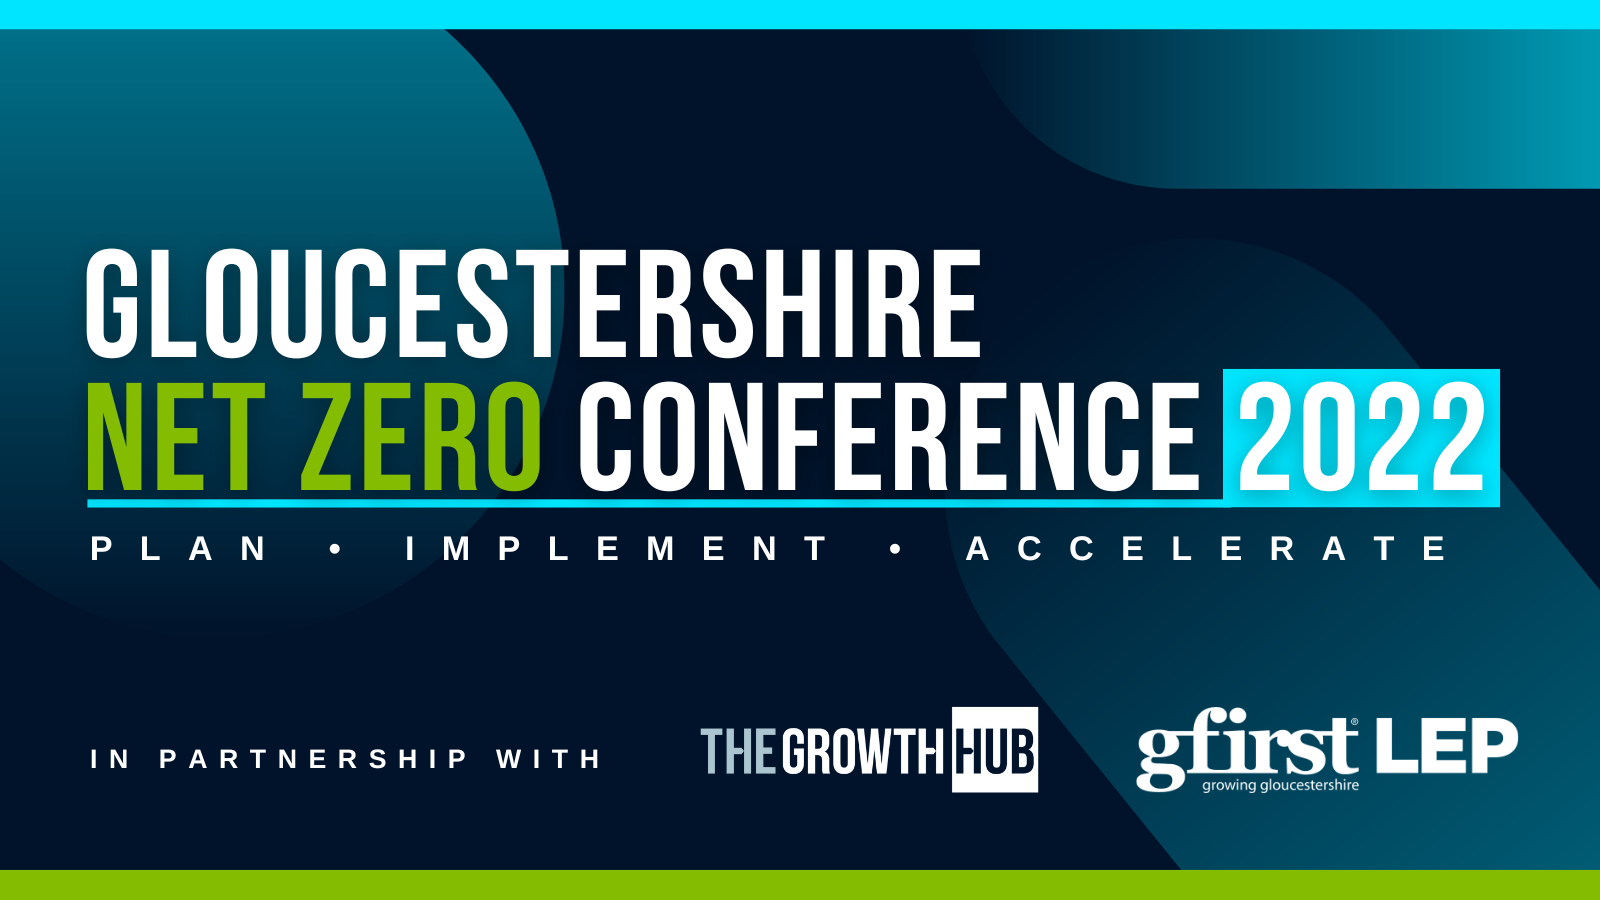 The Growth Hub to host Gloucestershire Net Zero Conference in partnership with GFirst LEP